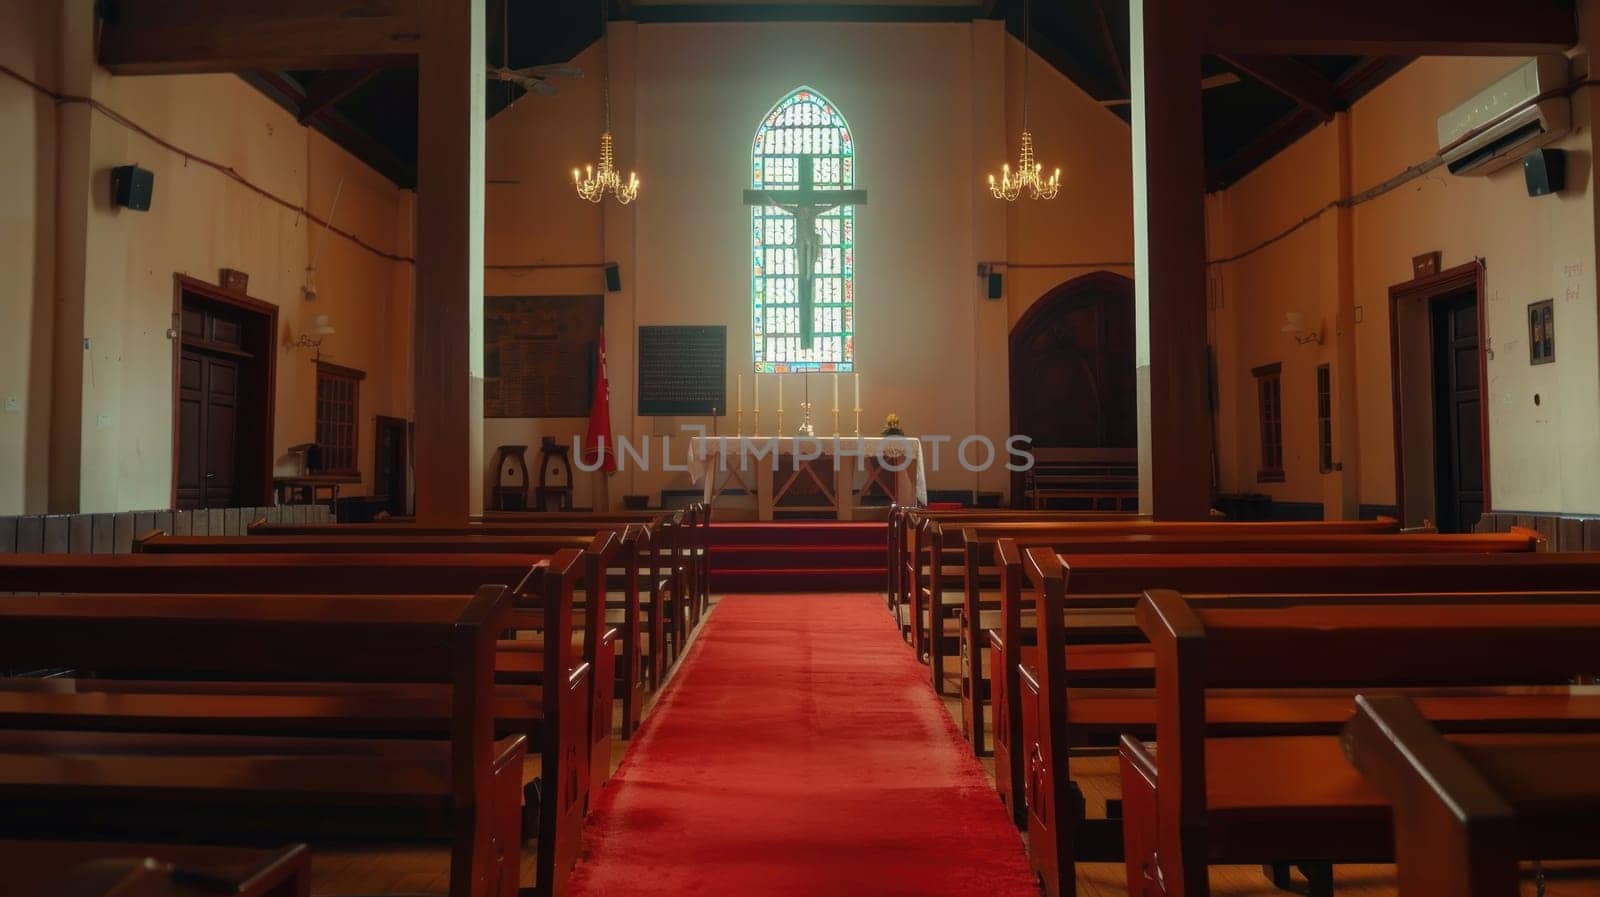 A church with a red carpet and stained glass windows.